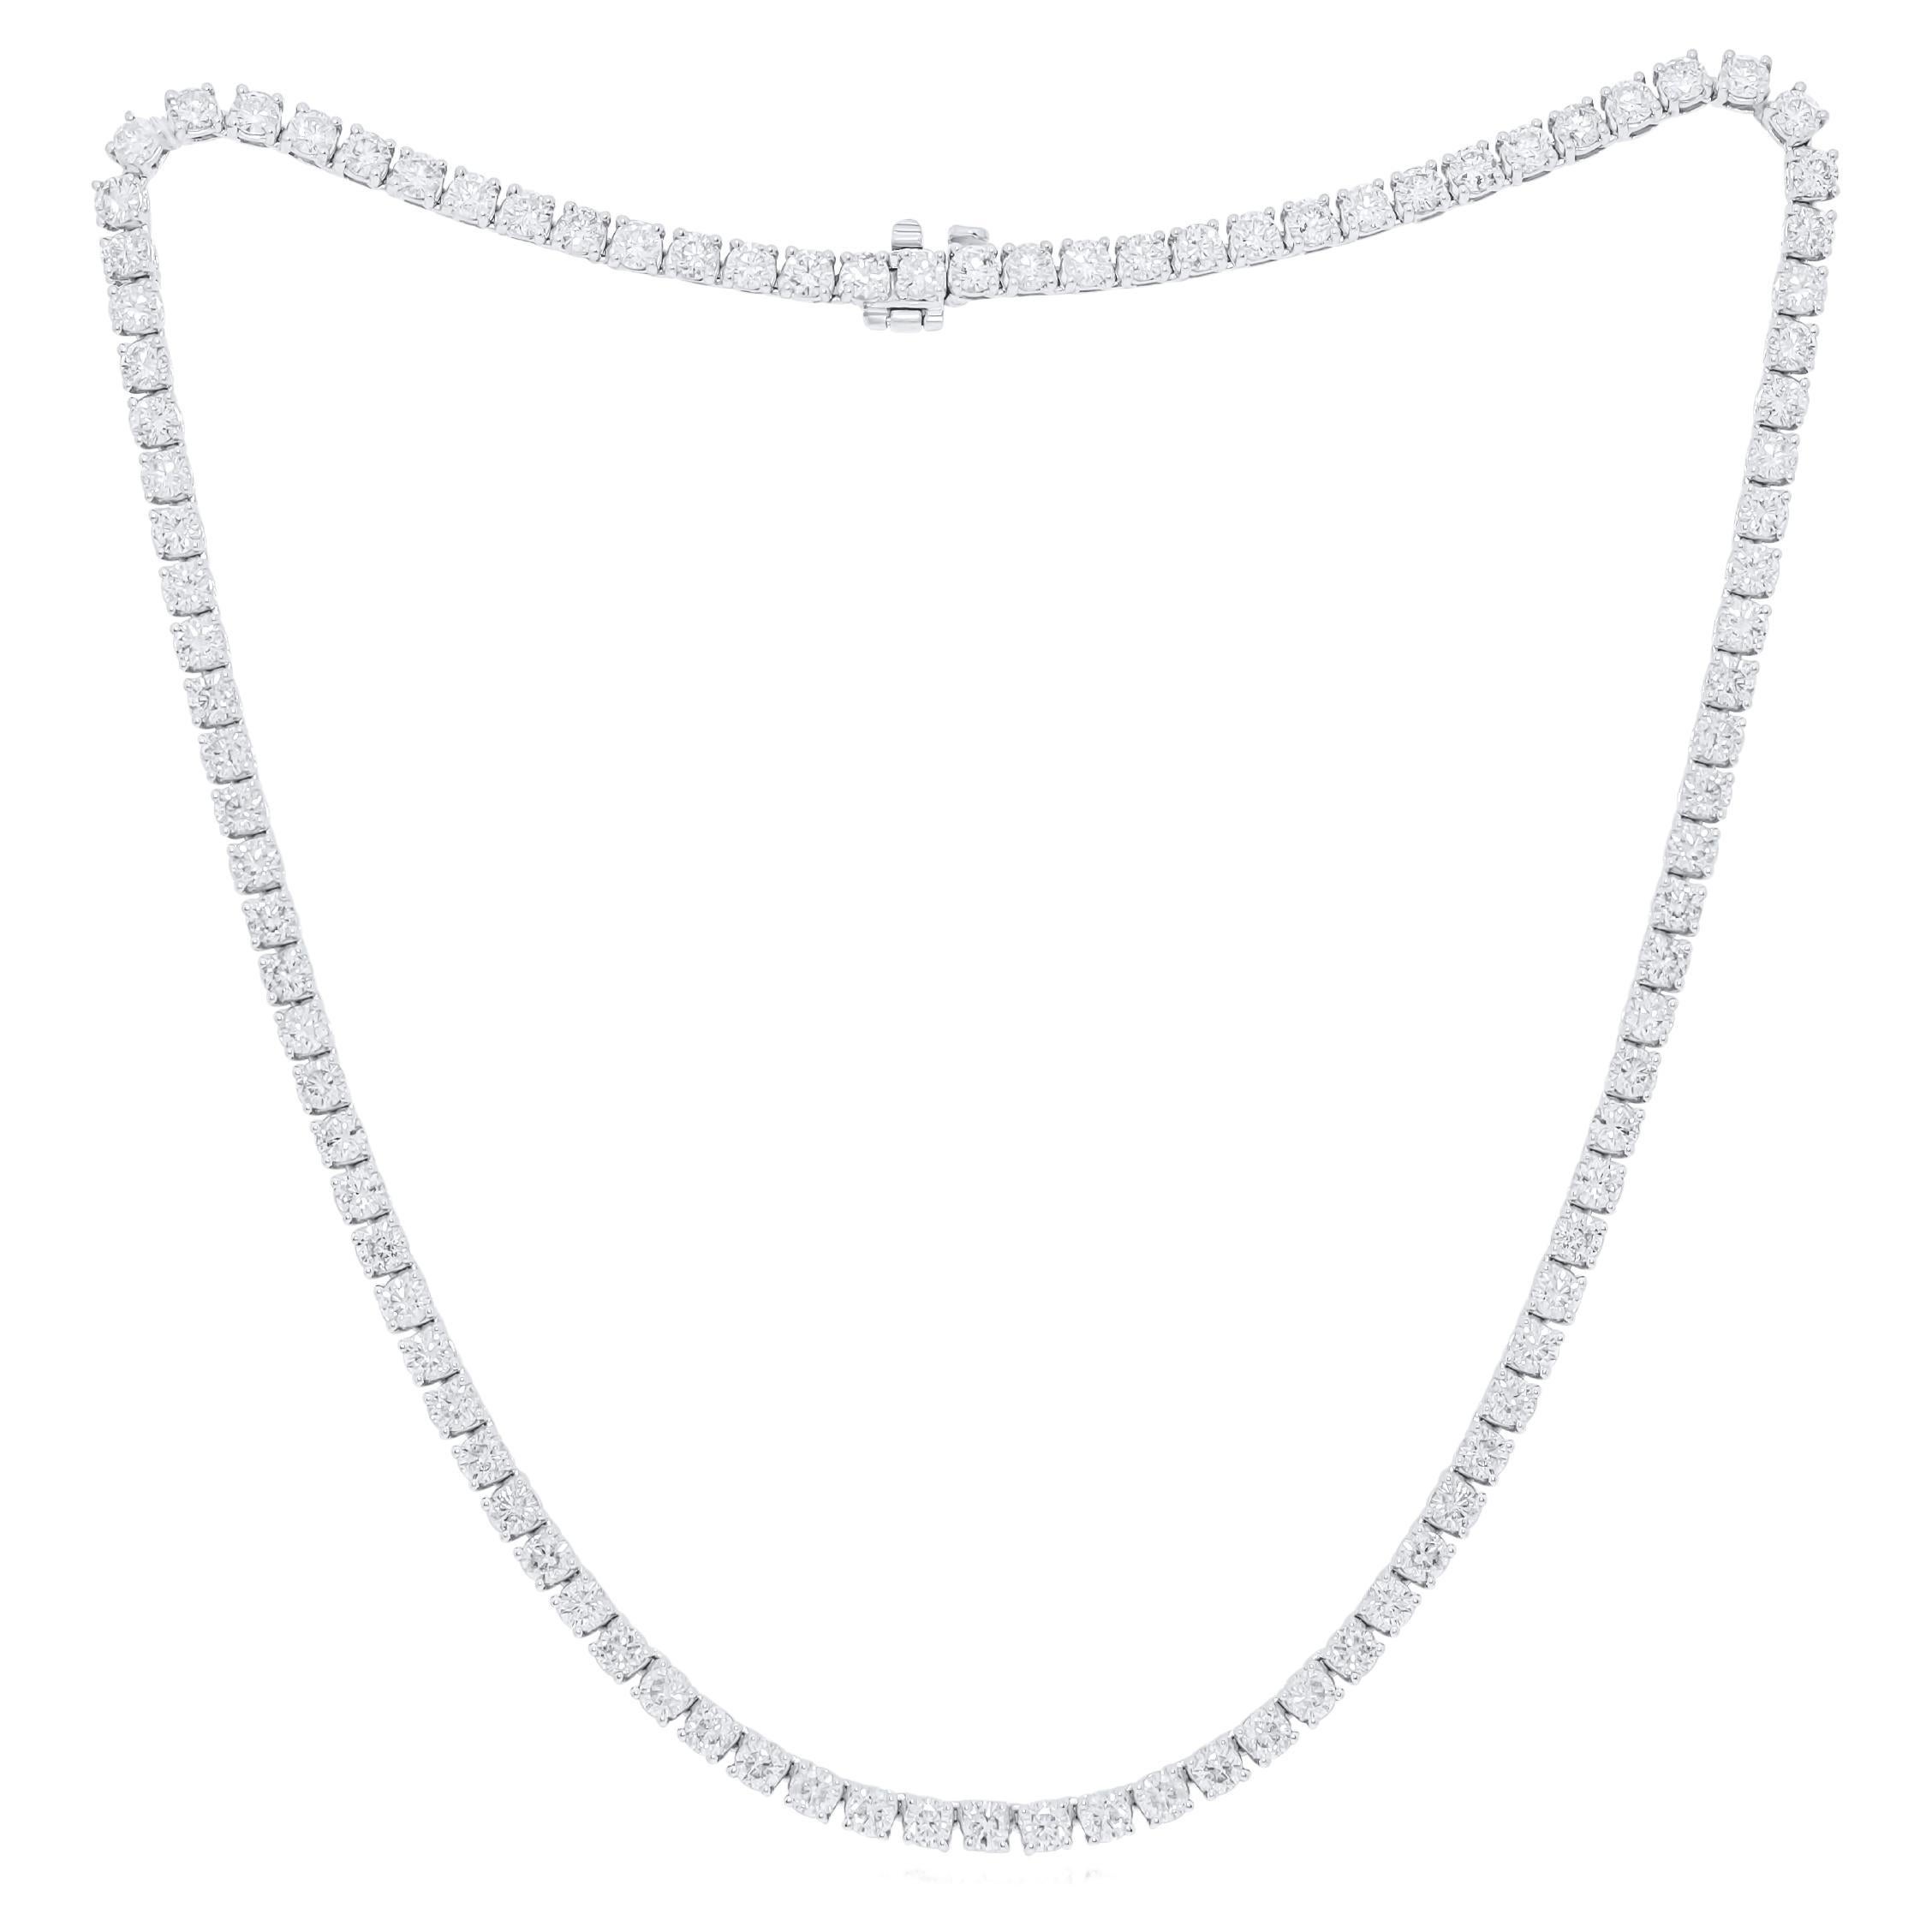 Diana M. Custom 12.00 Cts Round 4 Prong Diamond 18k White Gold Tennis Necklace  For Sale